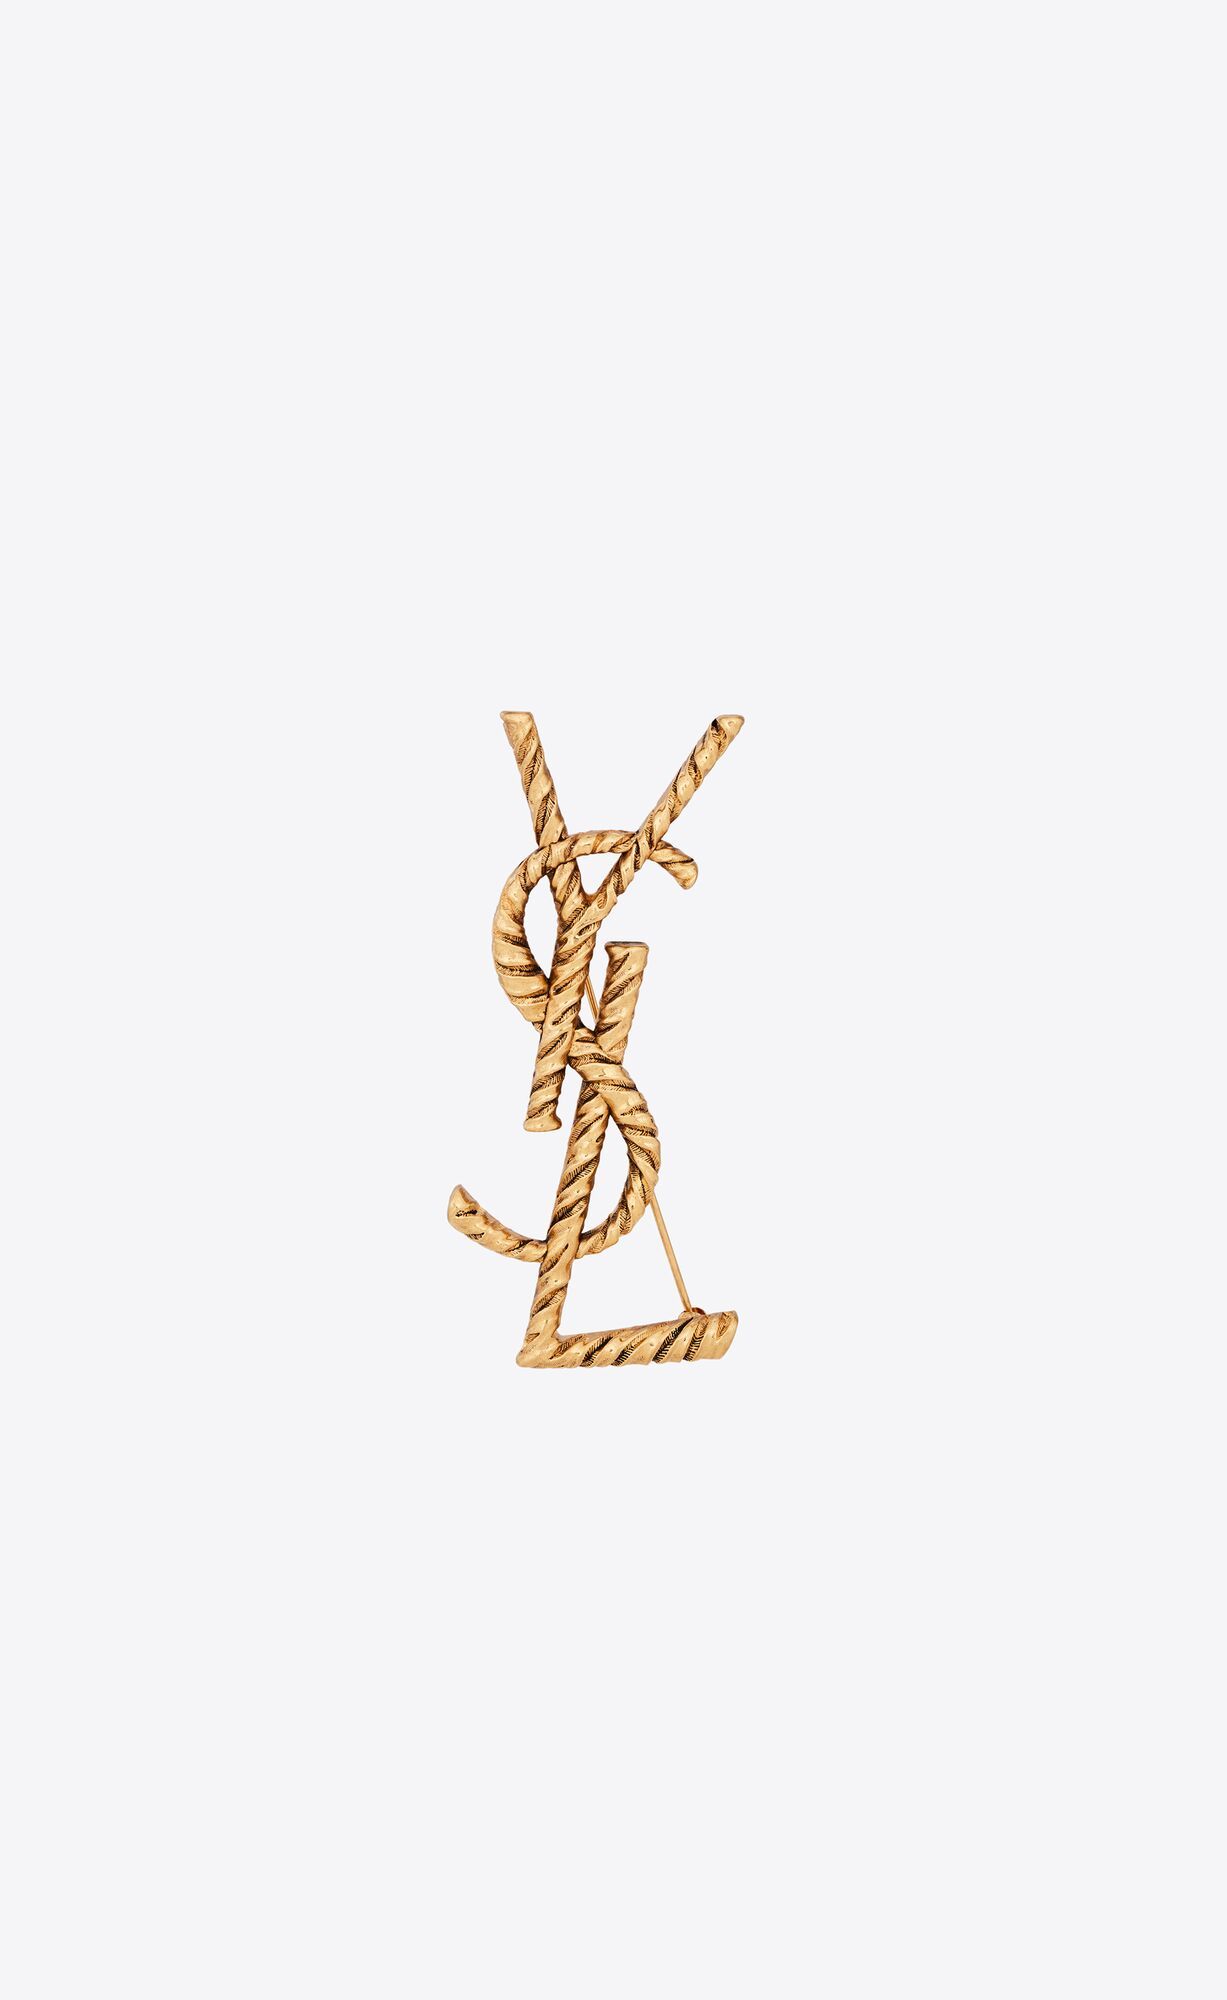 ysl monogram brooch with a twisted stripe texture. | Saint Laurent Inc. (Global)